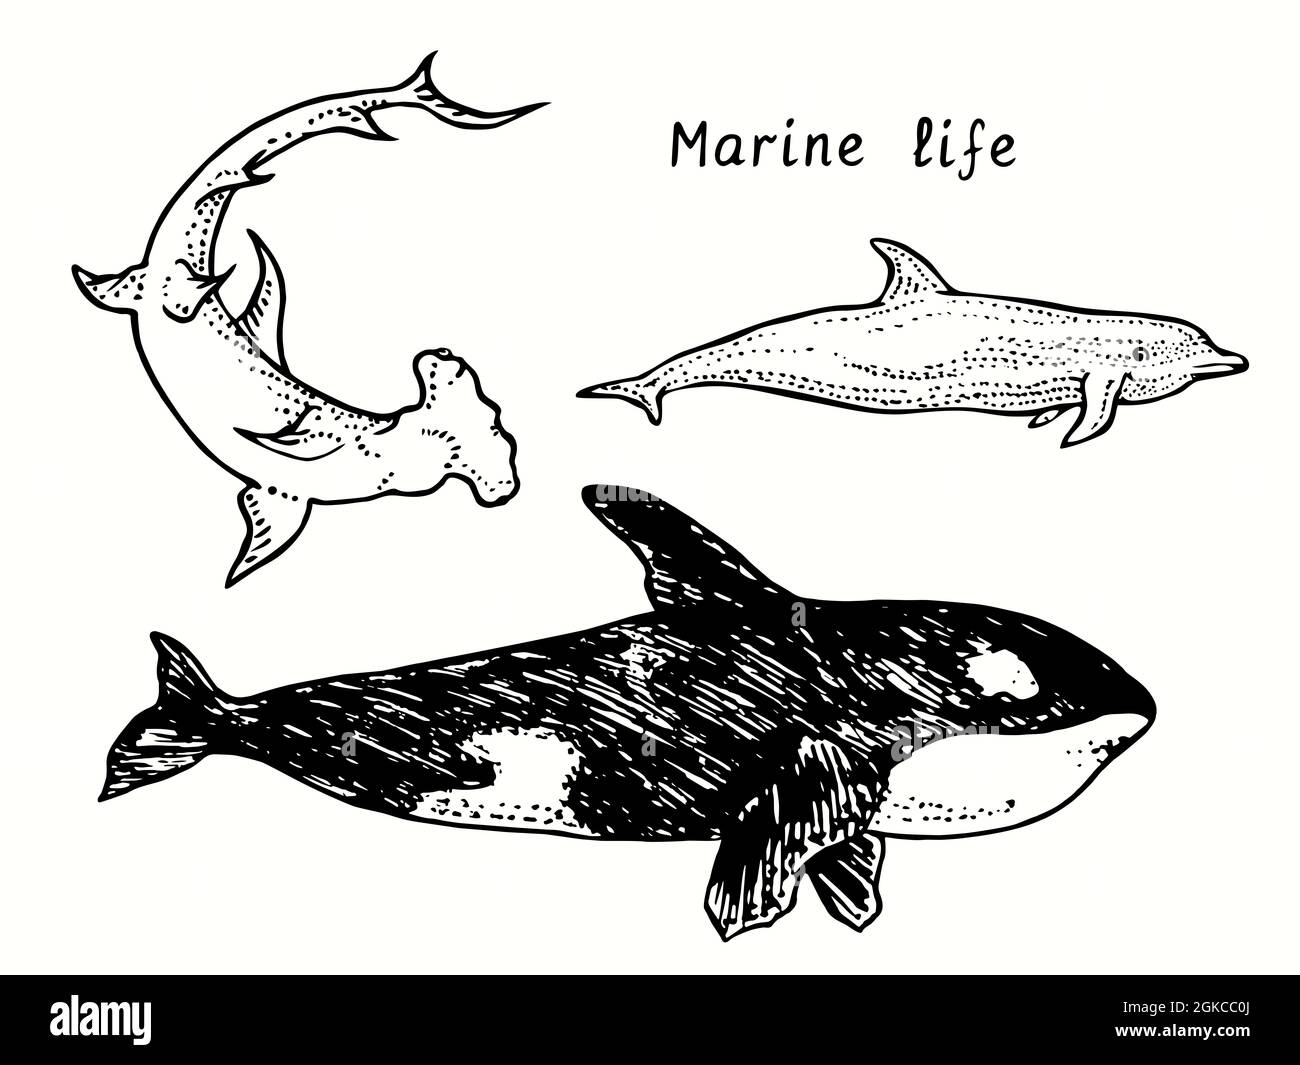 Marine life collection. Great Hummerhead shark, Killer whale (Orca), Bottlenose dolphin side view. Ink black and white doodle drawing  woodcut style Stock Photo